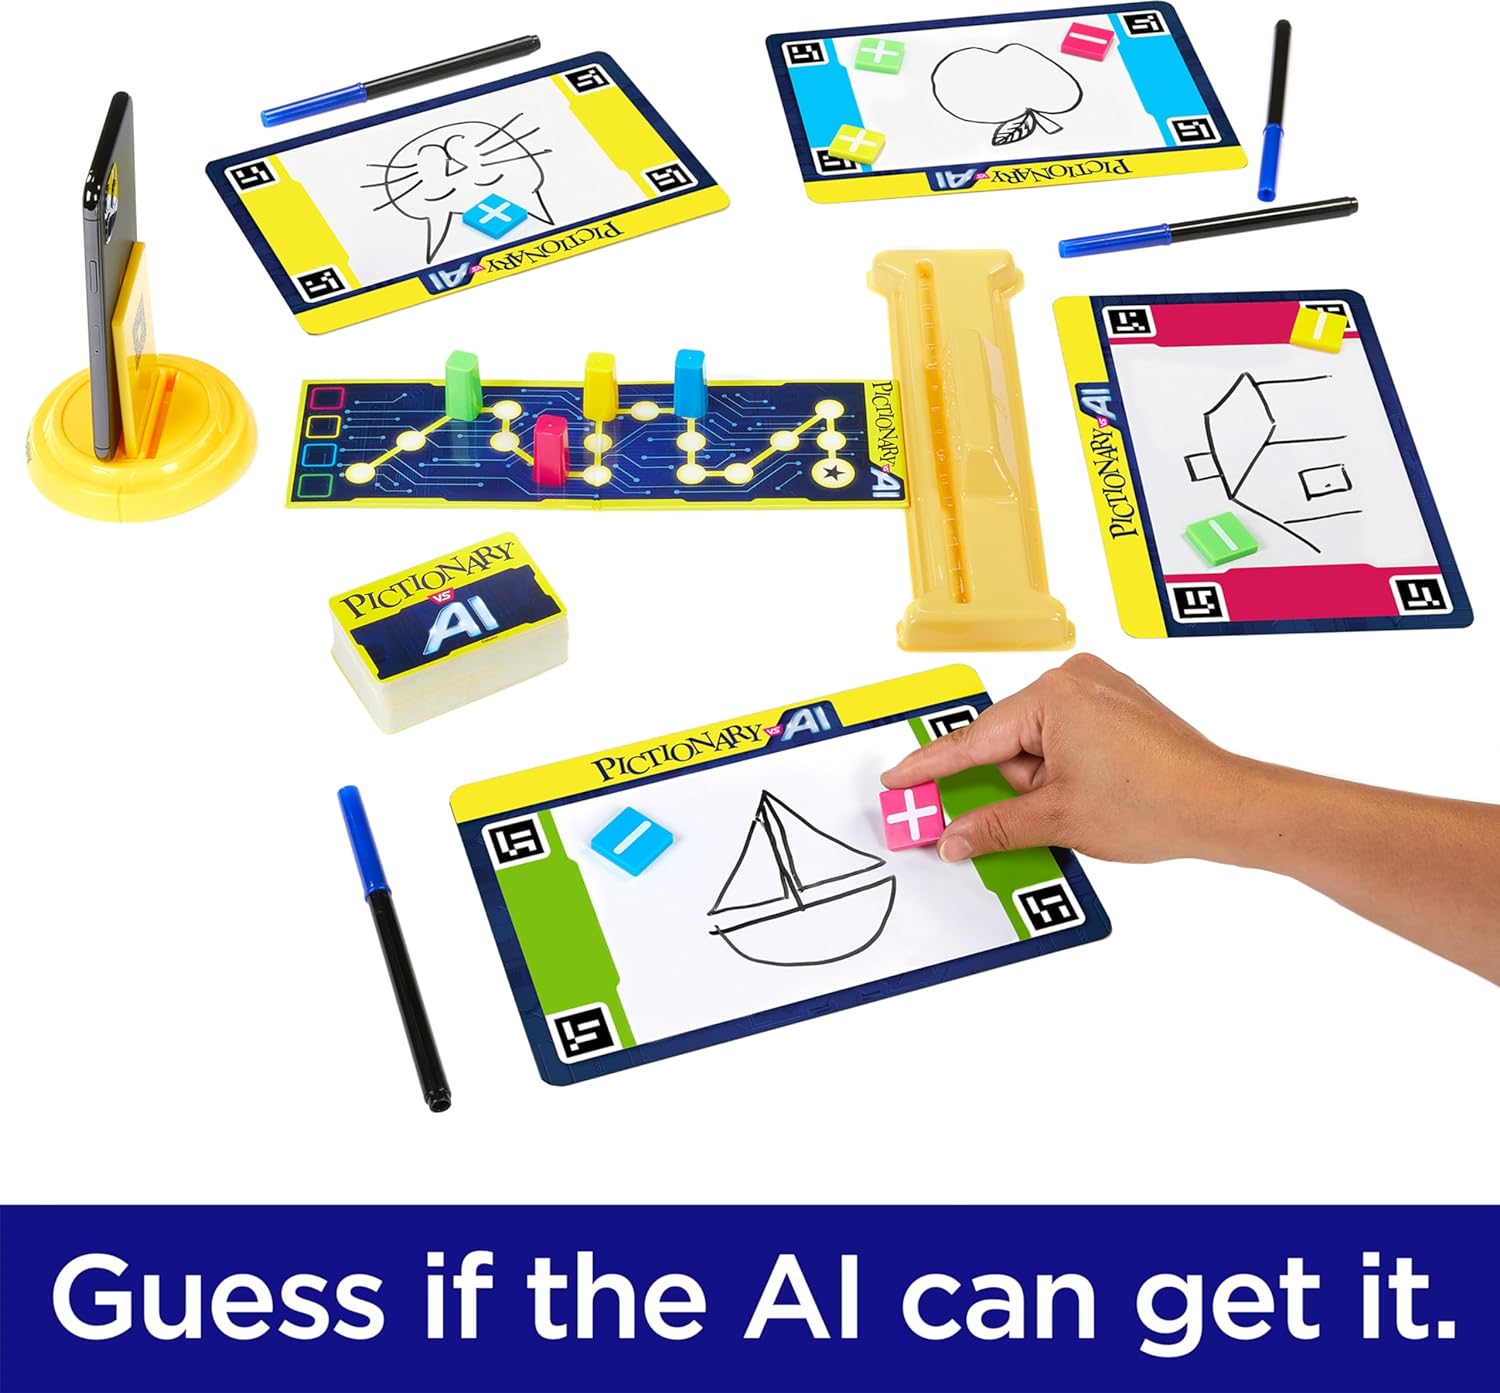 Mattel Games Pictionary Vs. AI Family Game for Kids and Adults and Game Night Using Artificial Intelligence for 2 – 4 Players